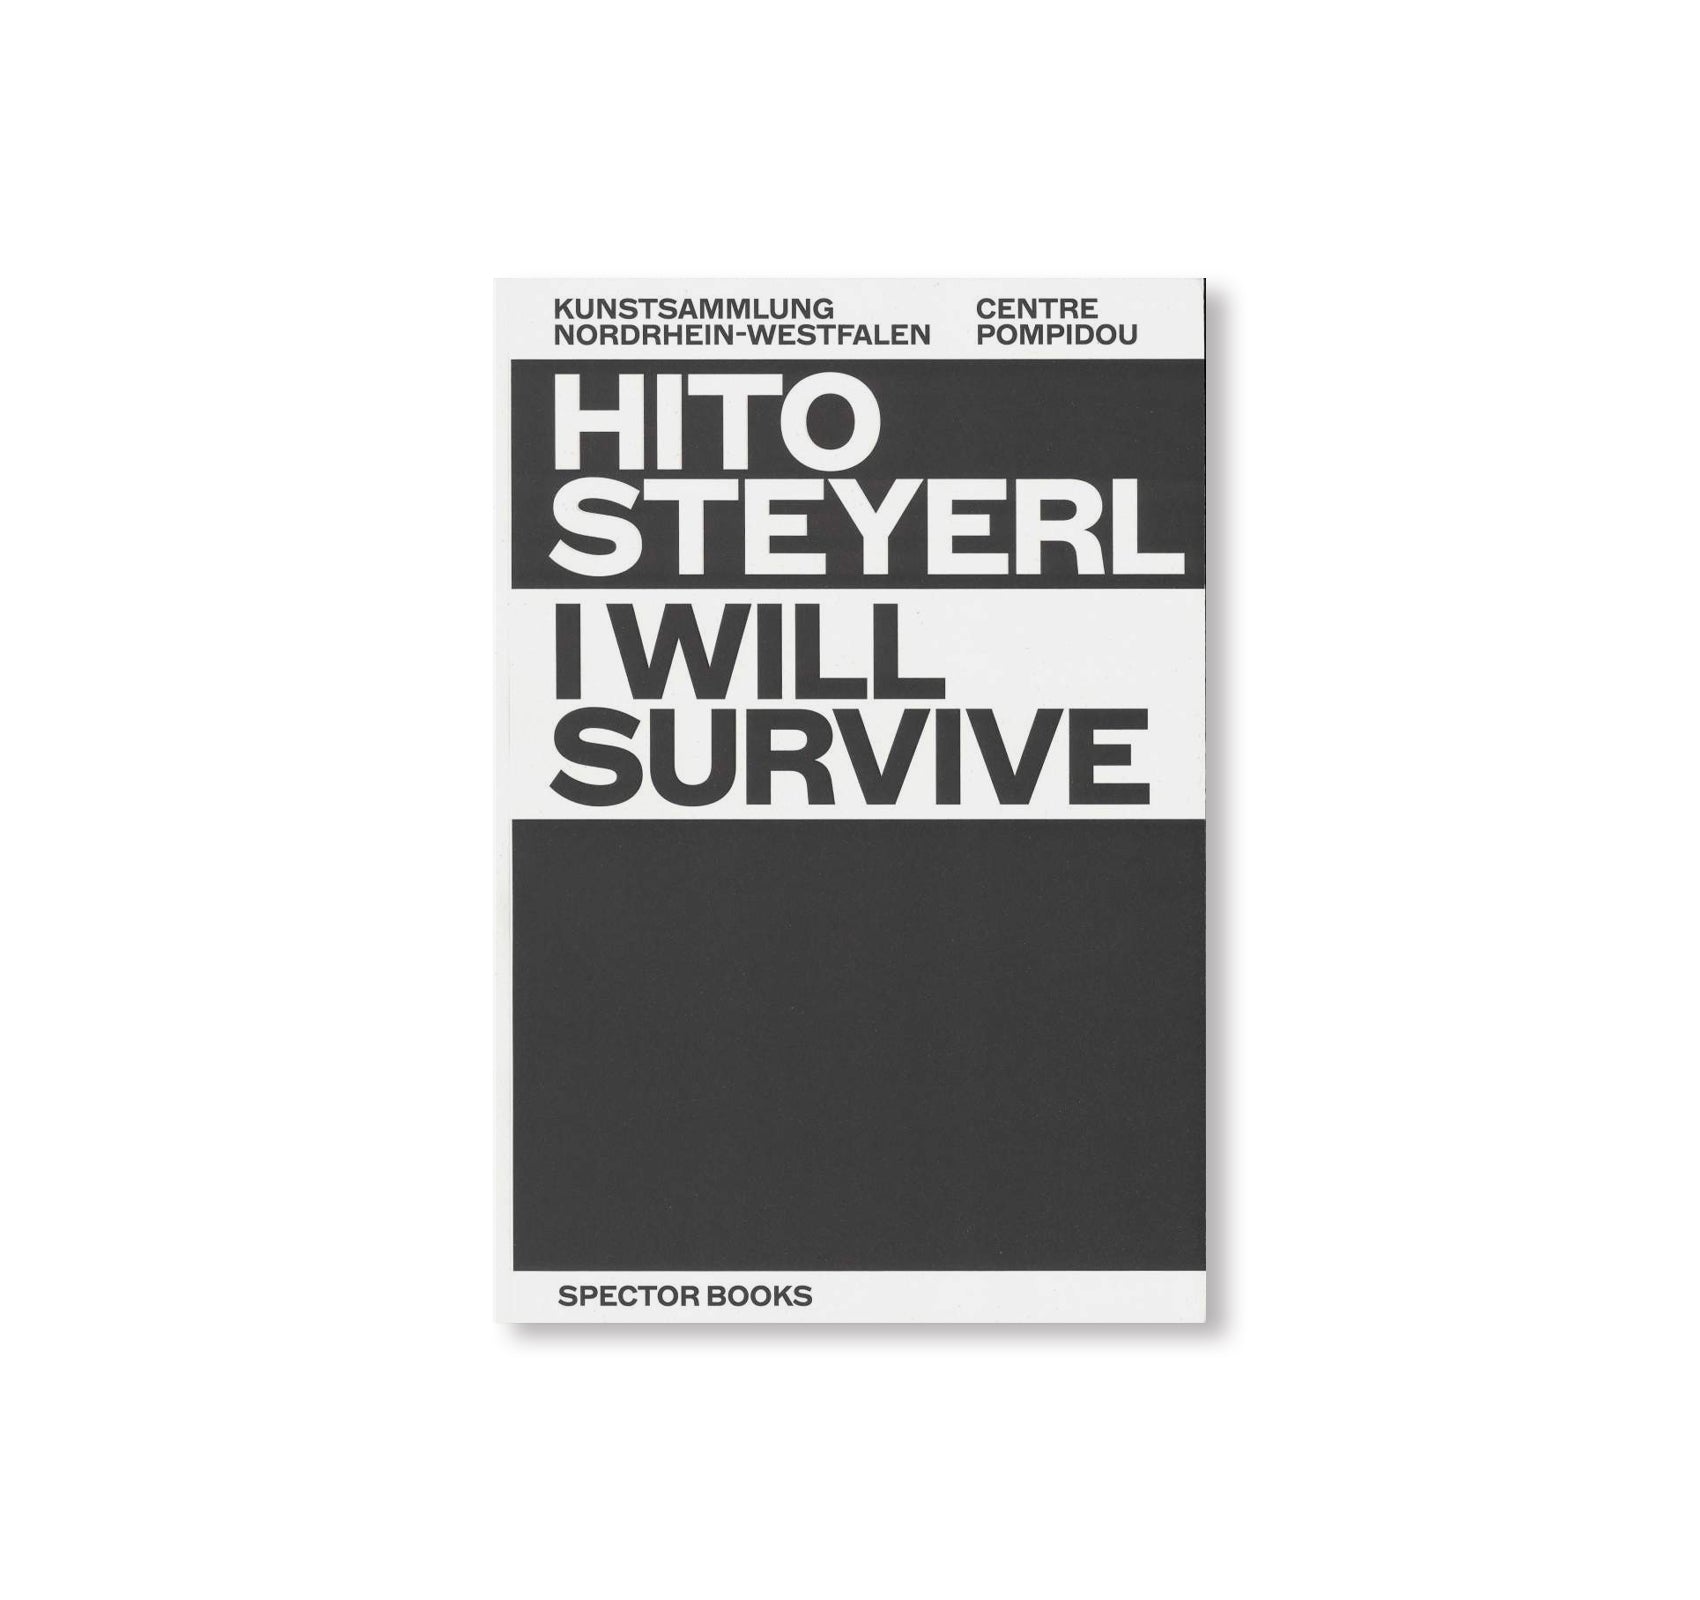 I WILL SURVIVE by Hito Steyerl